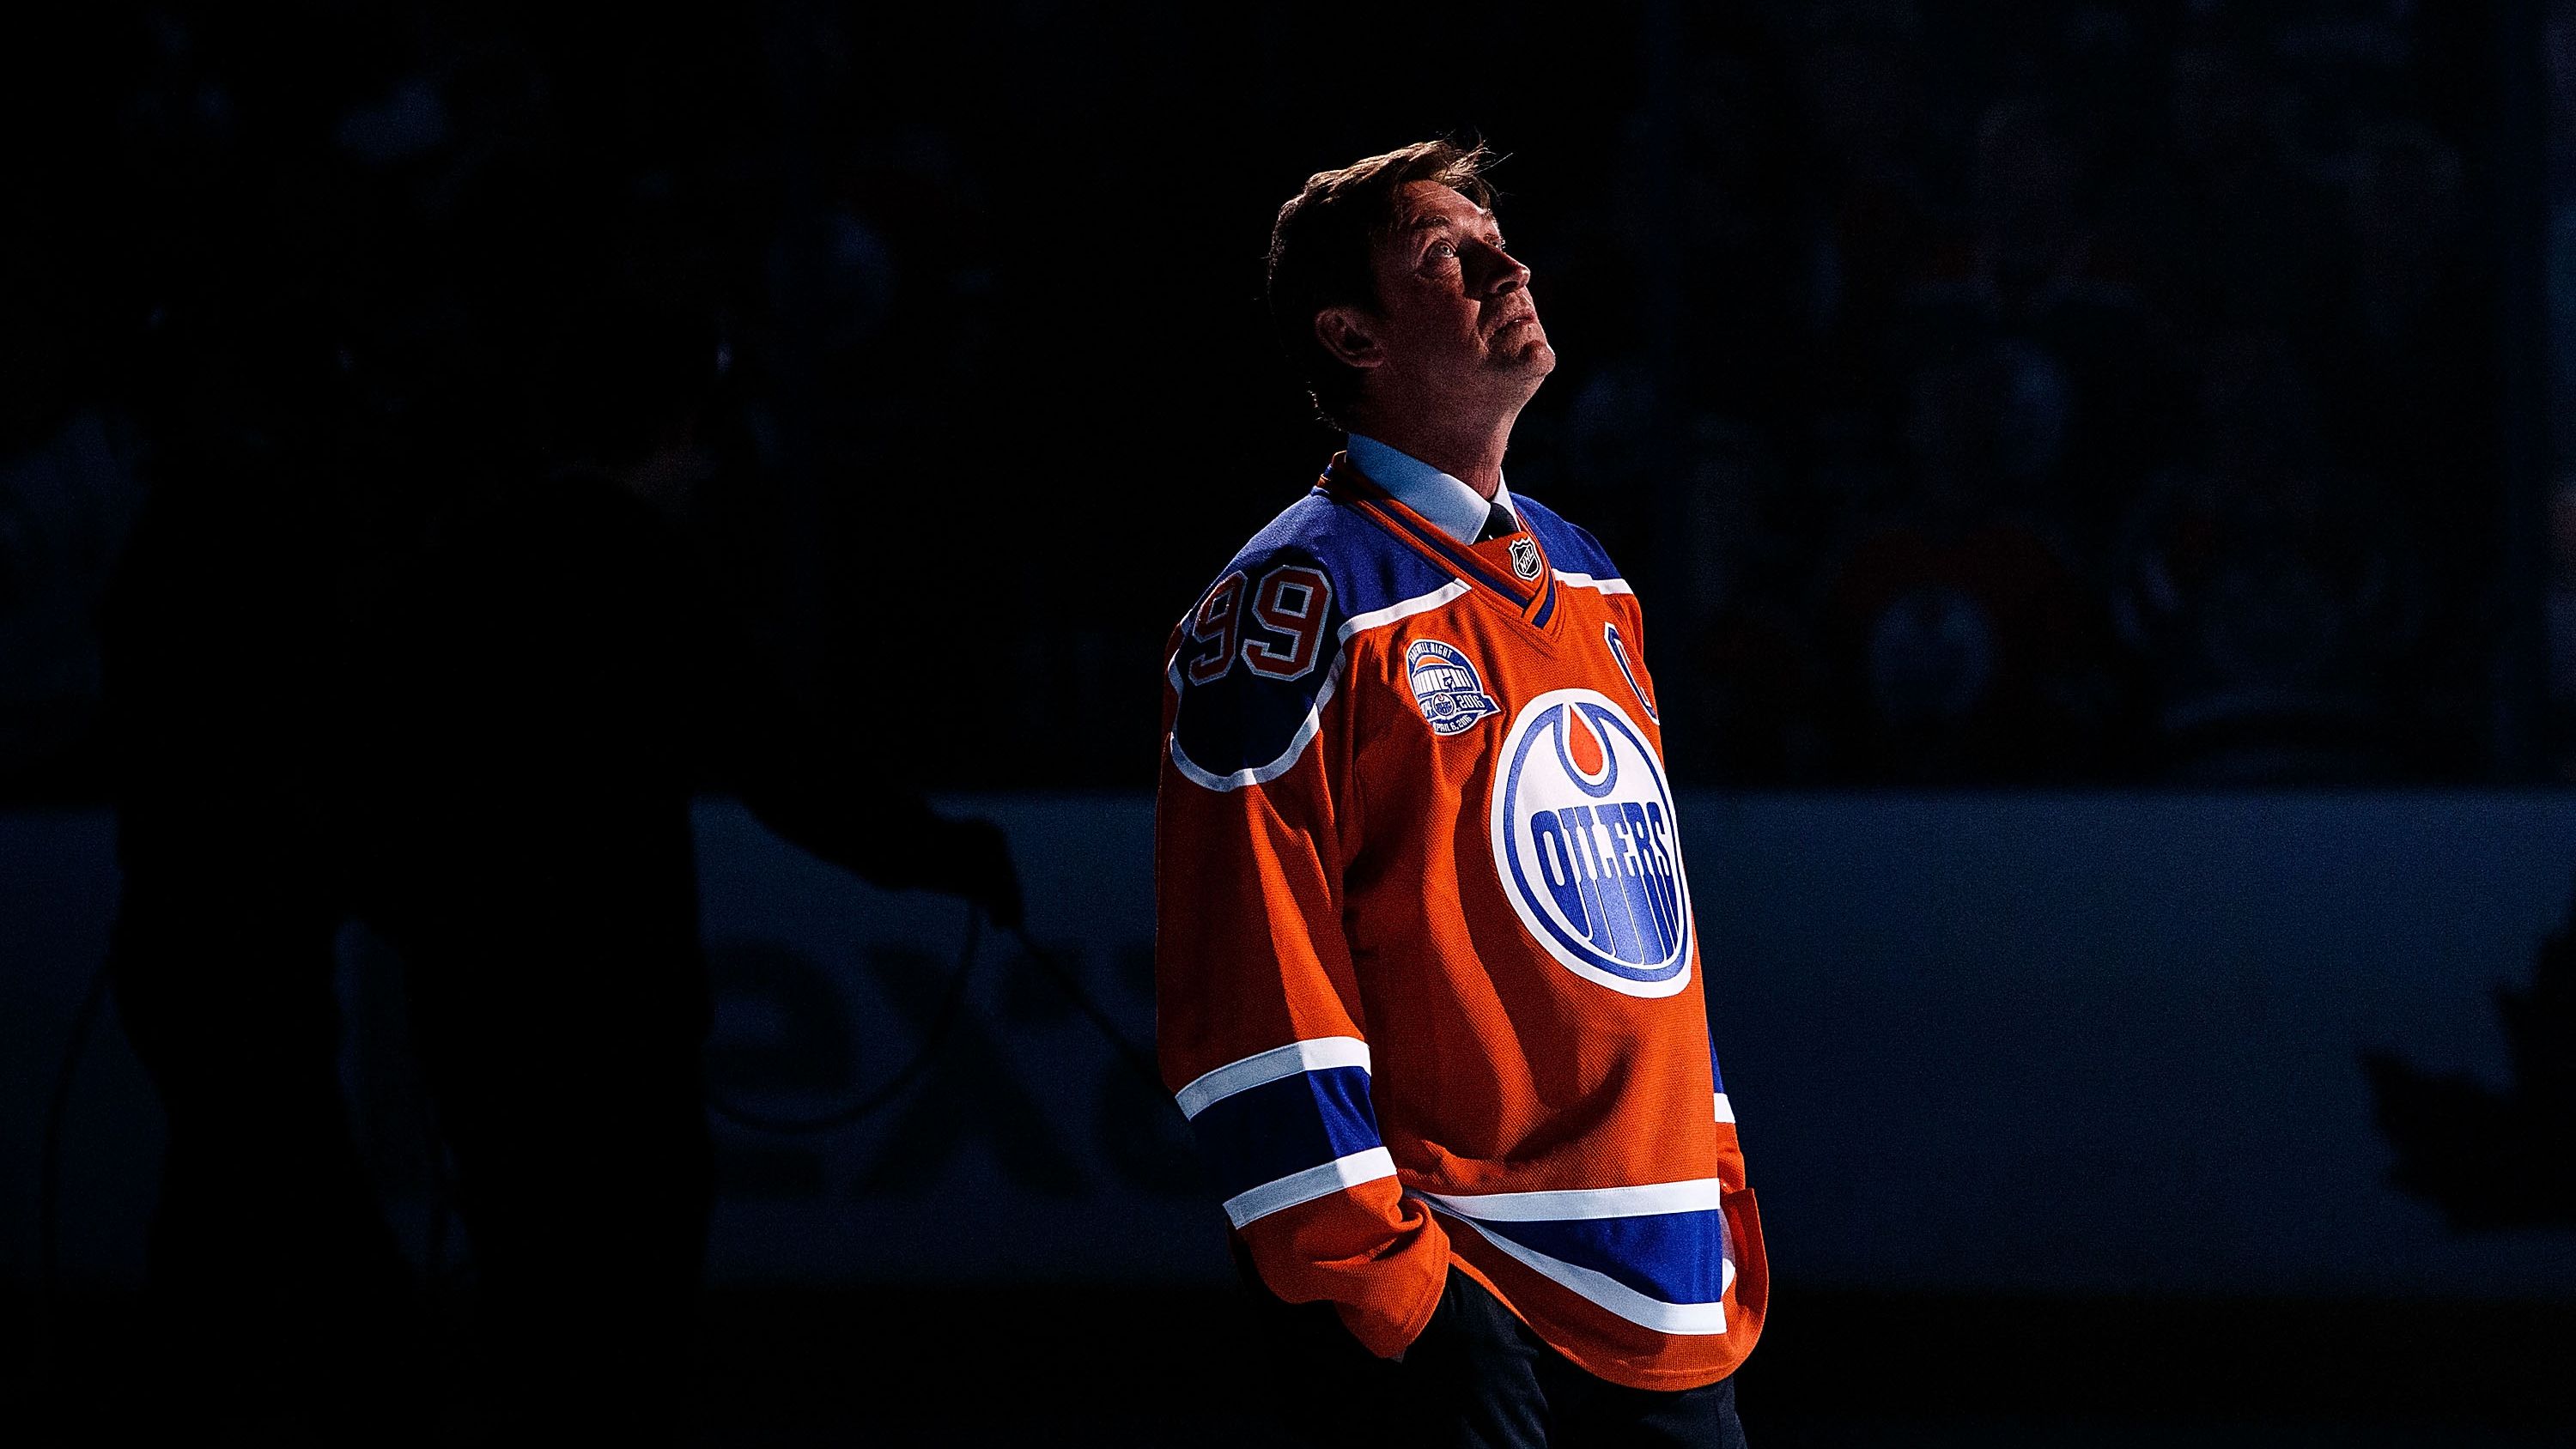 Wayne Gretzky is traded from the Edmonton Oilers to the Los